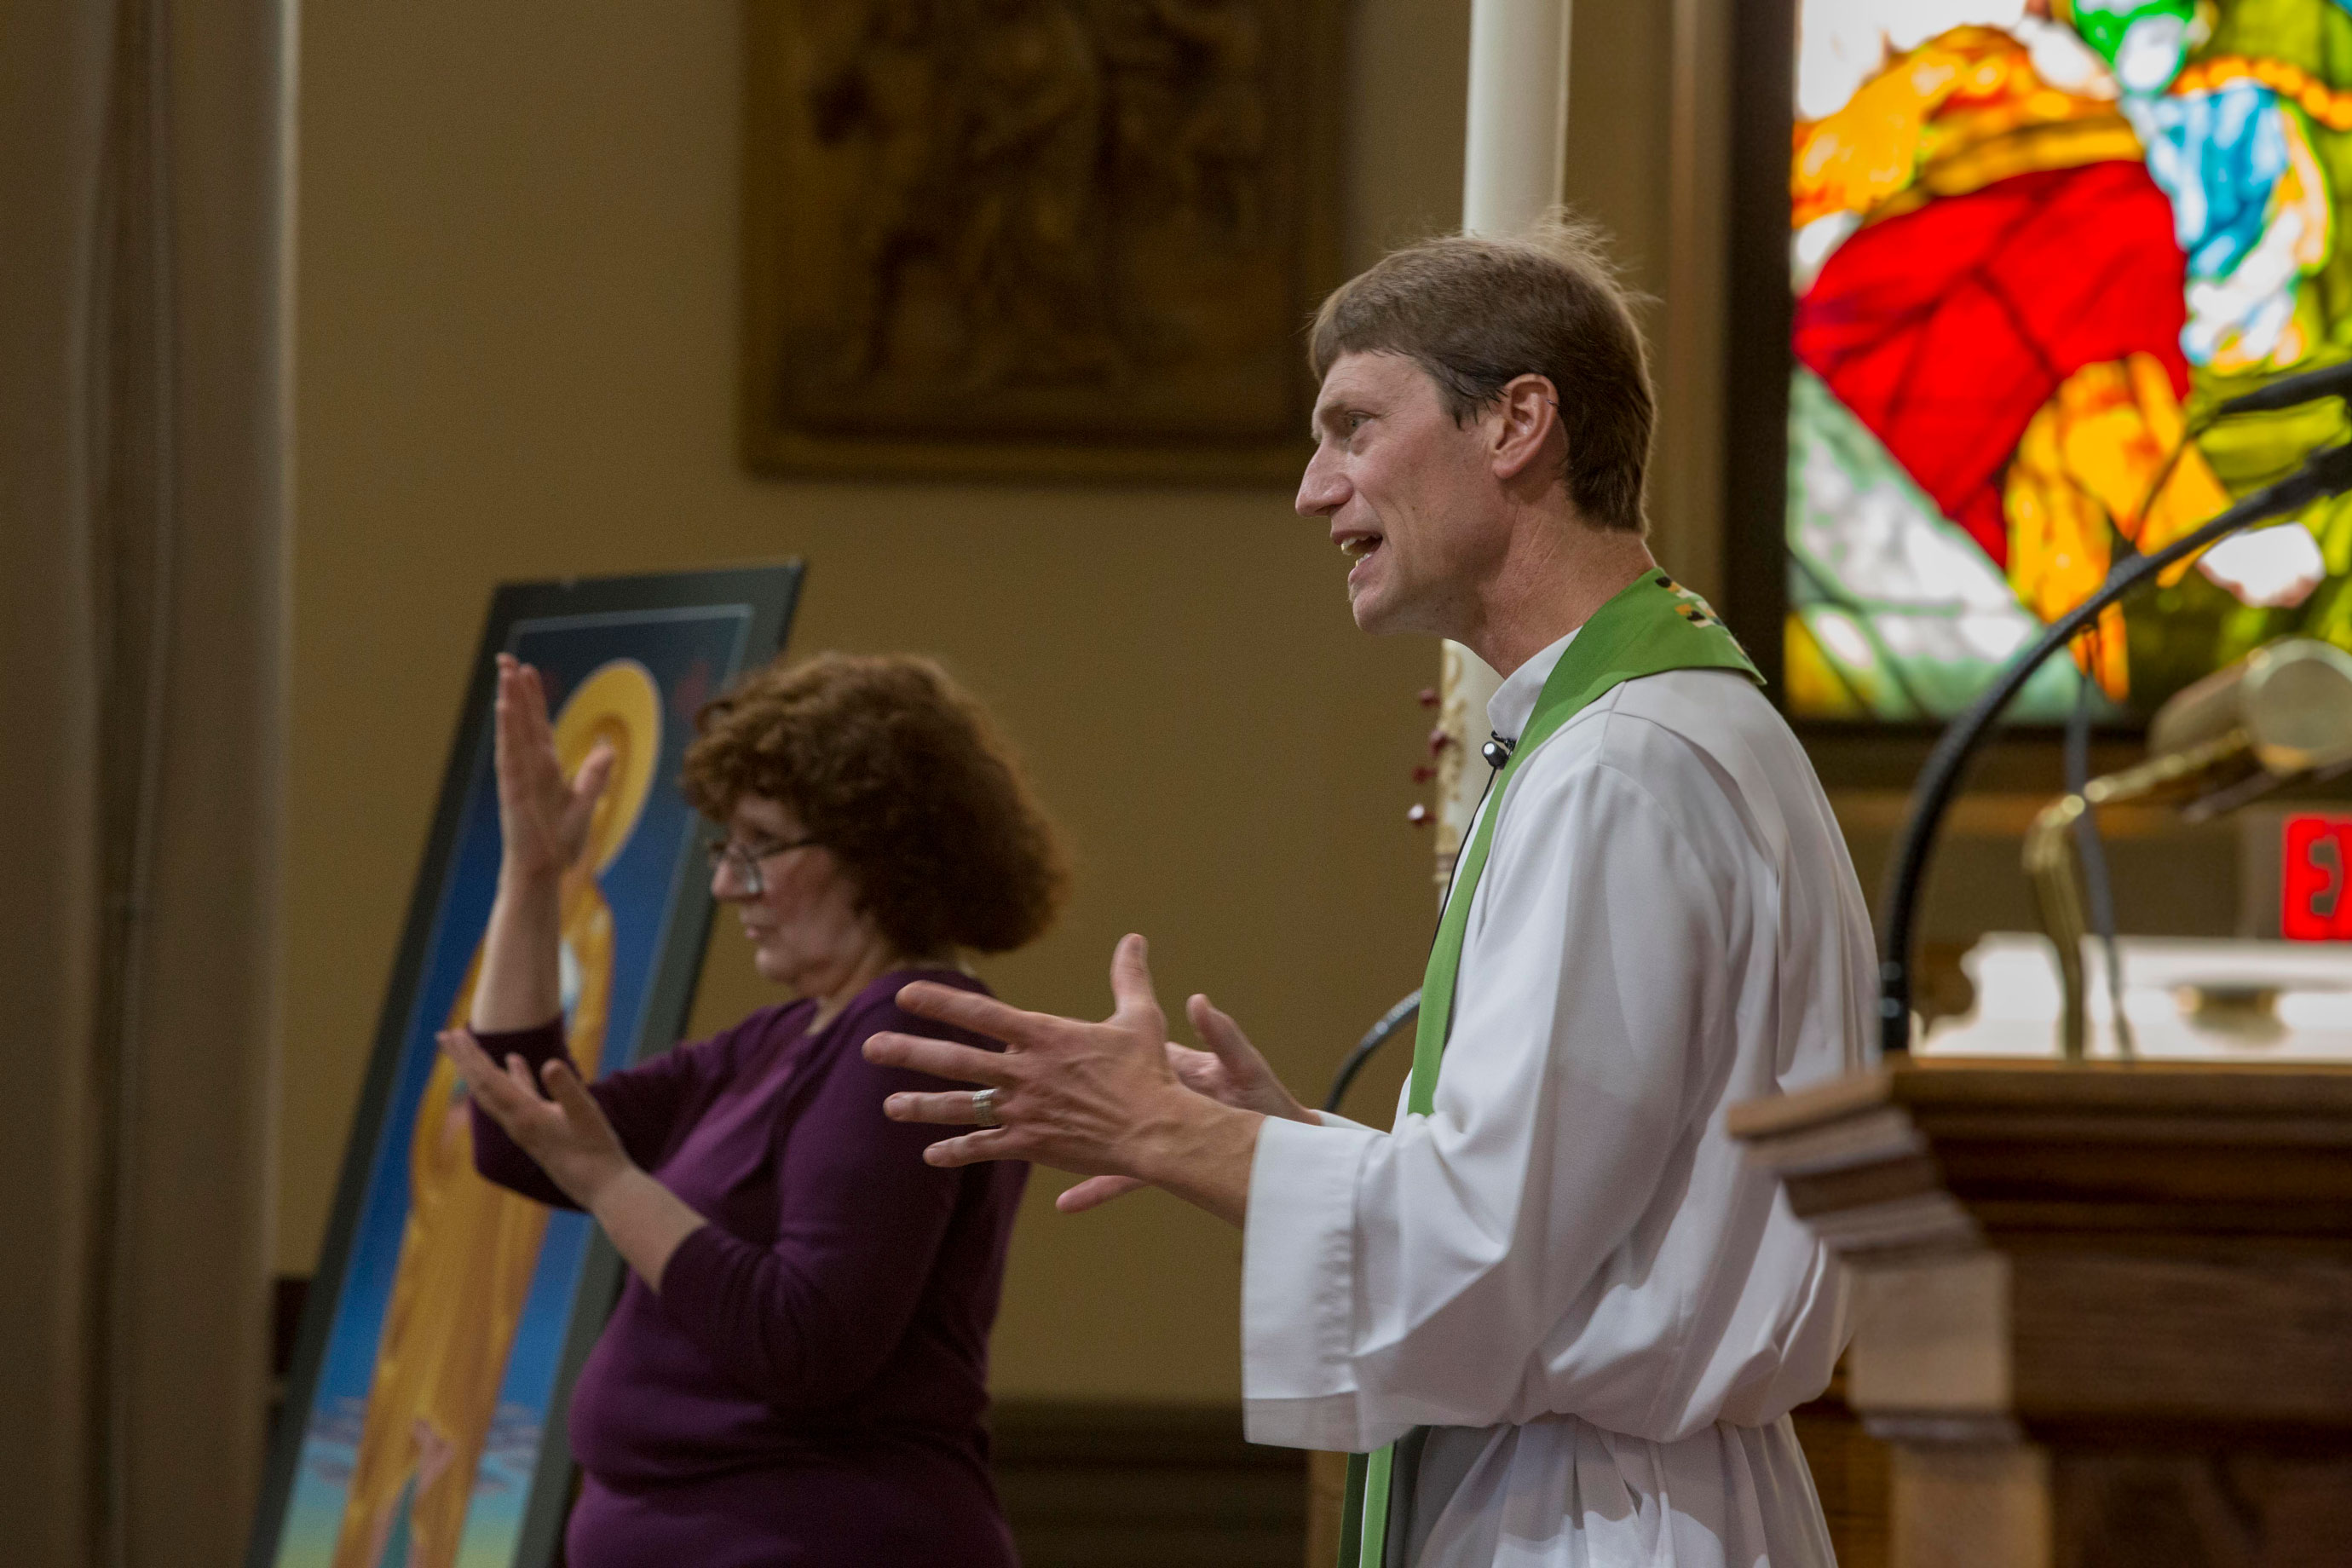 Photograph of a catholic priest delivering a sermon. He's inside a church in front of his congregation. In the background, a woman interprets his sermon in American Sign Language along with him.